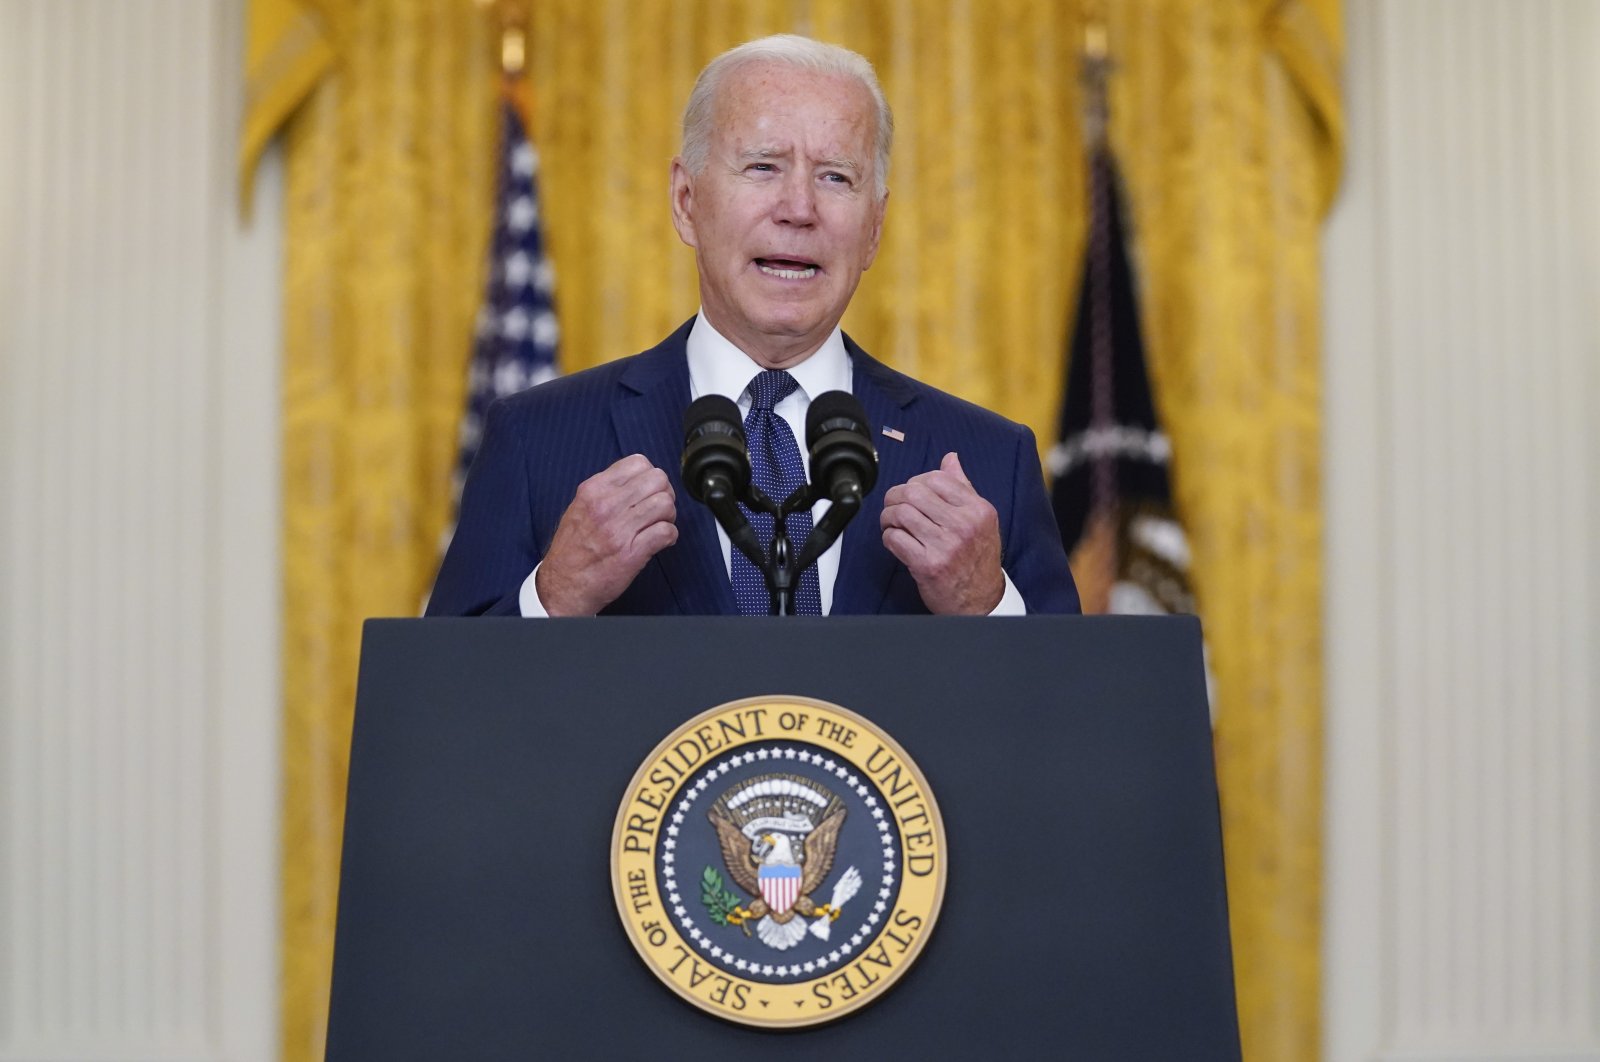 U.S. President Joe Biden speaks about the bombings at the Kabul airport that killed at least 12 U.S. service members, from the East Room of the White House, Washington, U.S., Aug. 26, 2021. (Photo by Evan Vucci via AP)